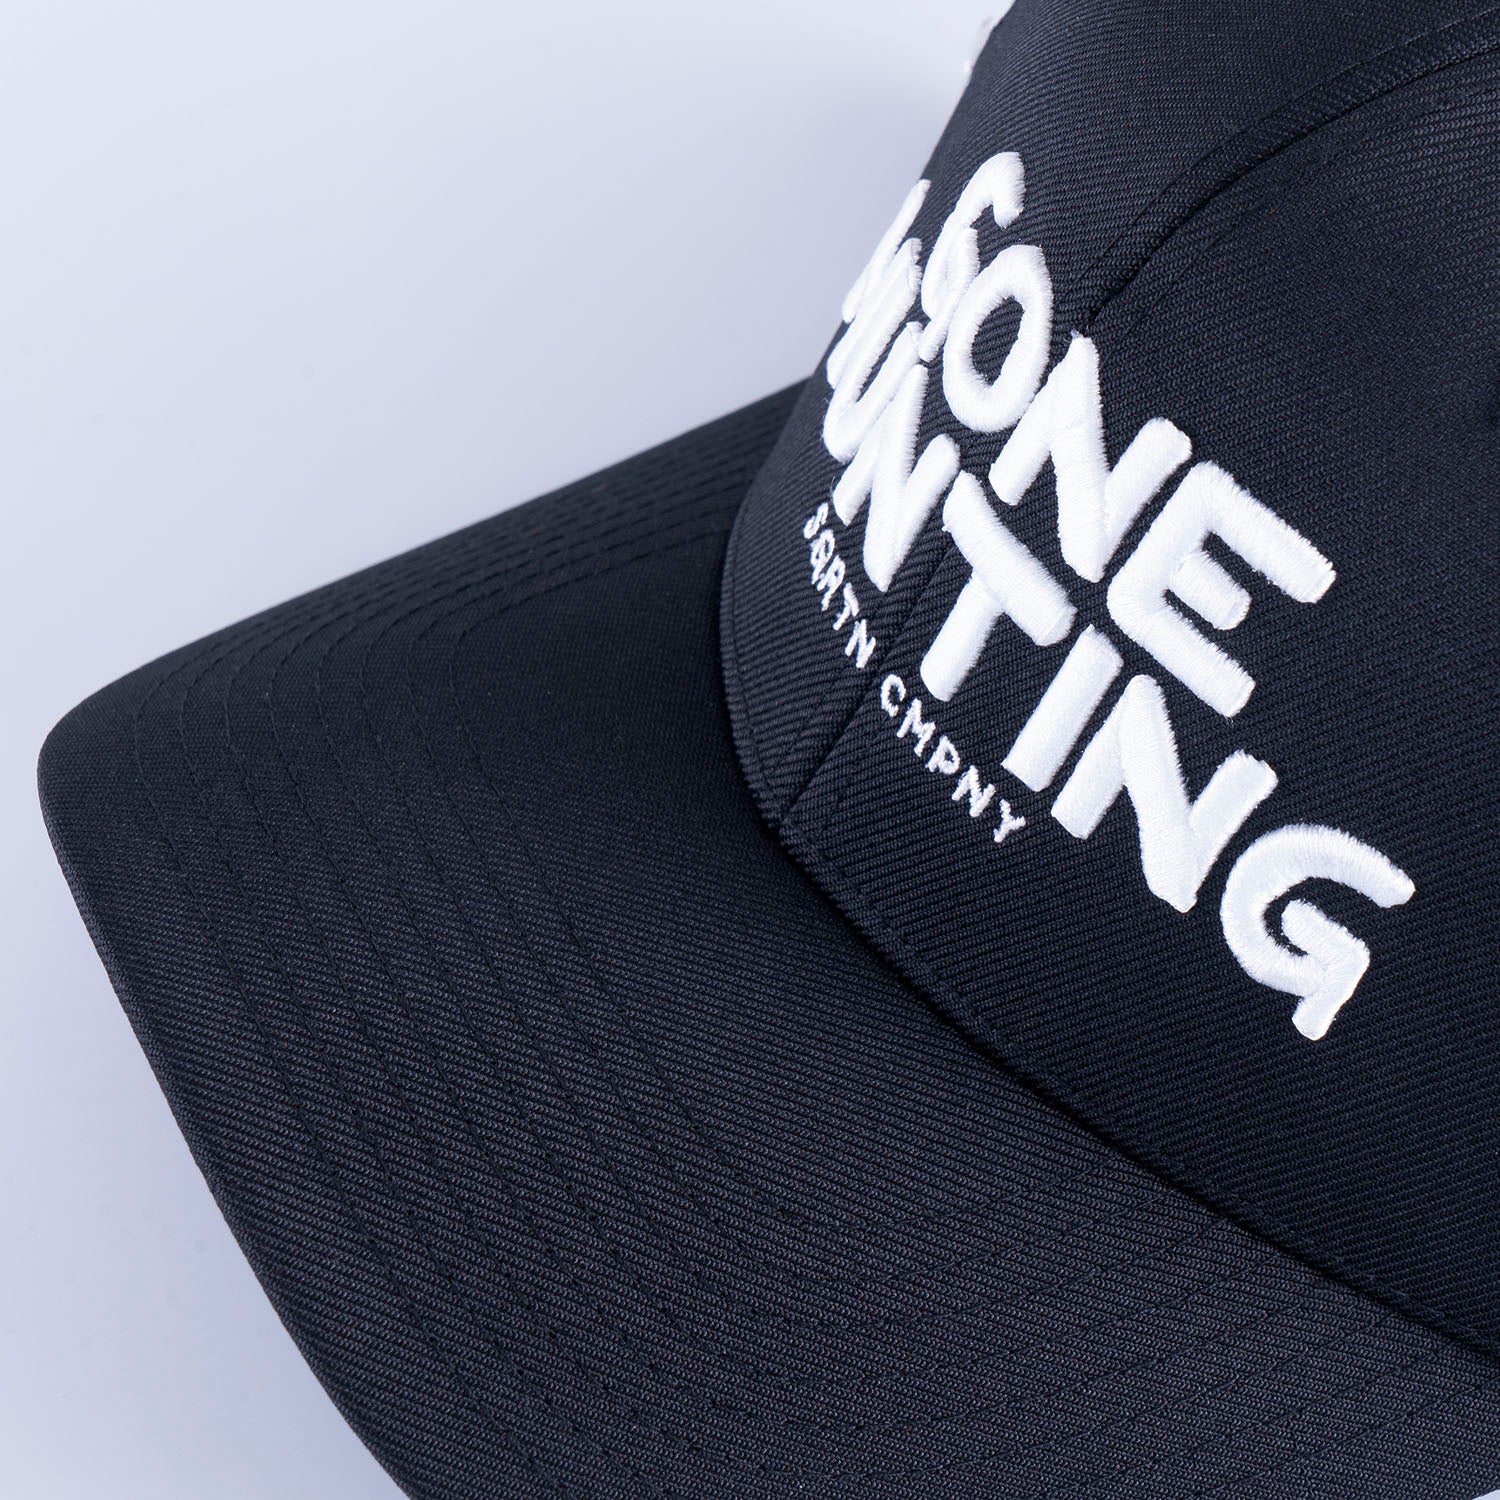 GONE HUNTING COMPACT 120 CAP - BLACK